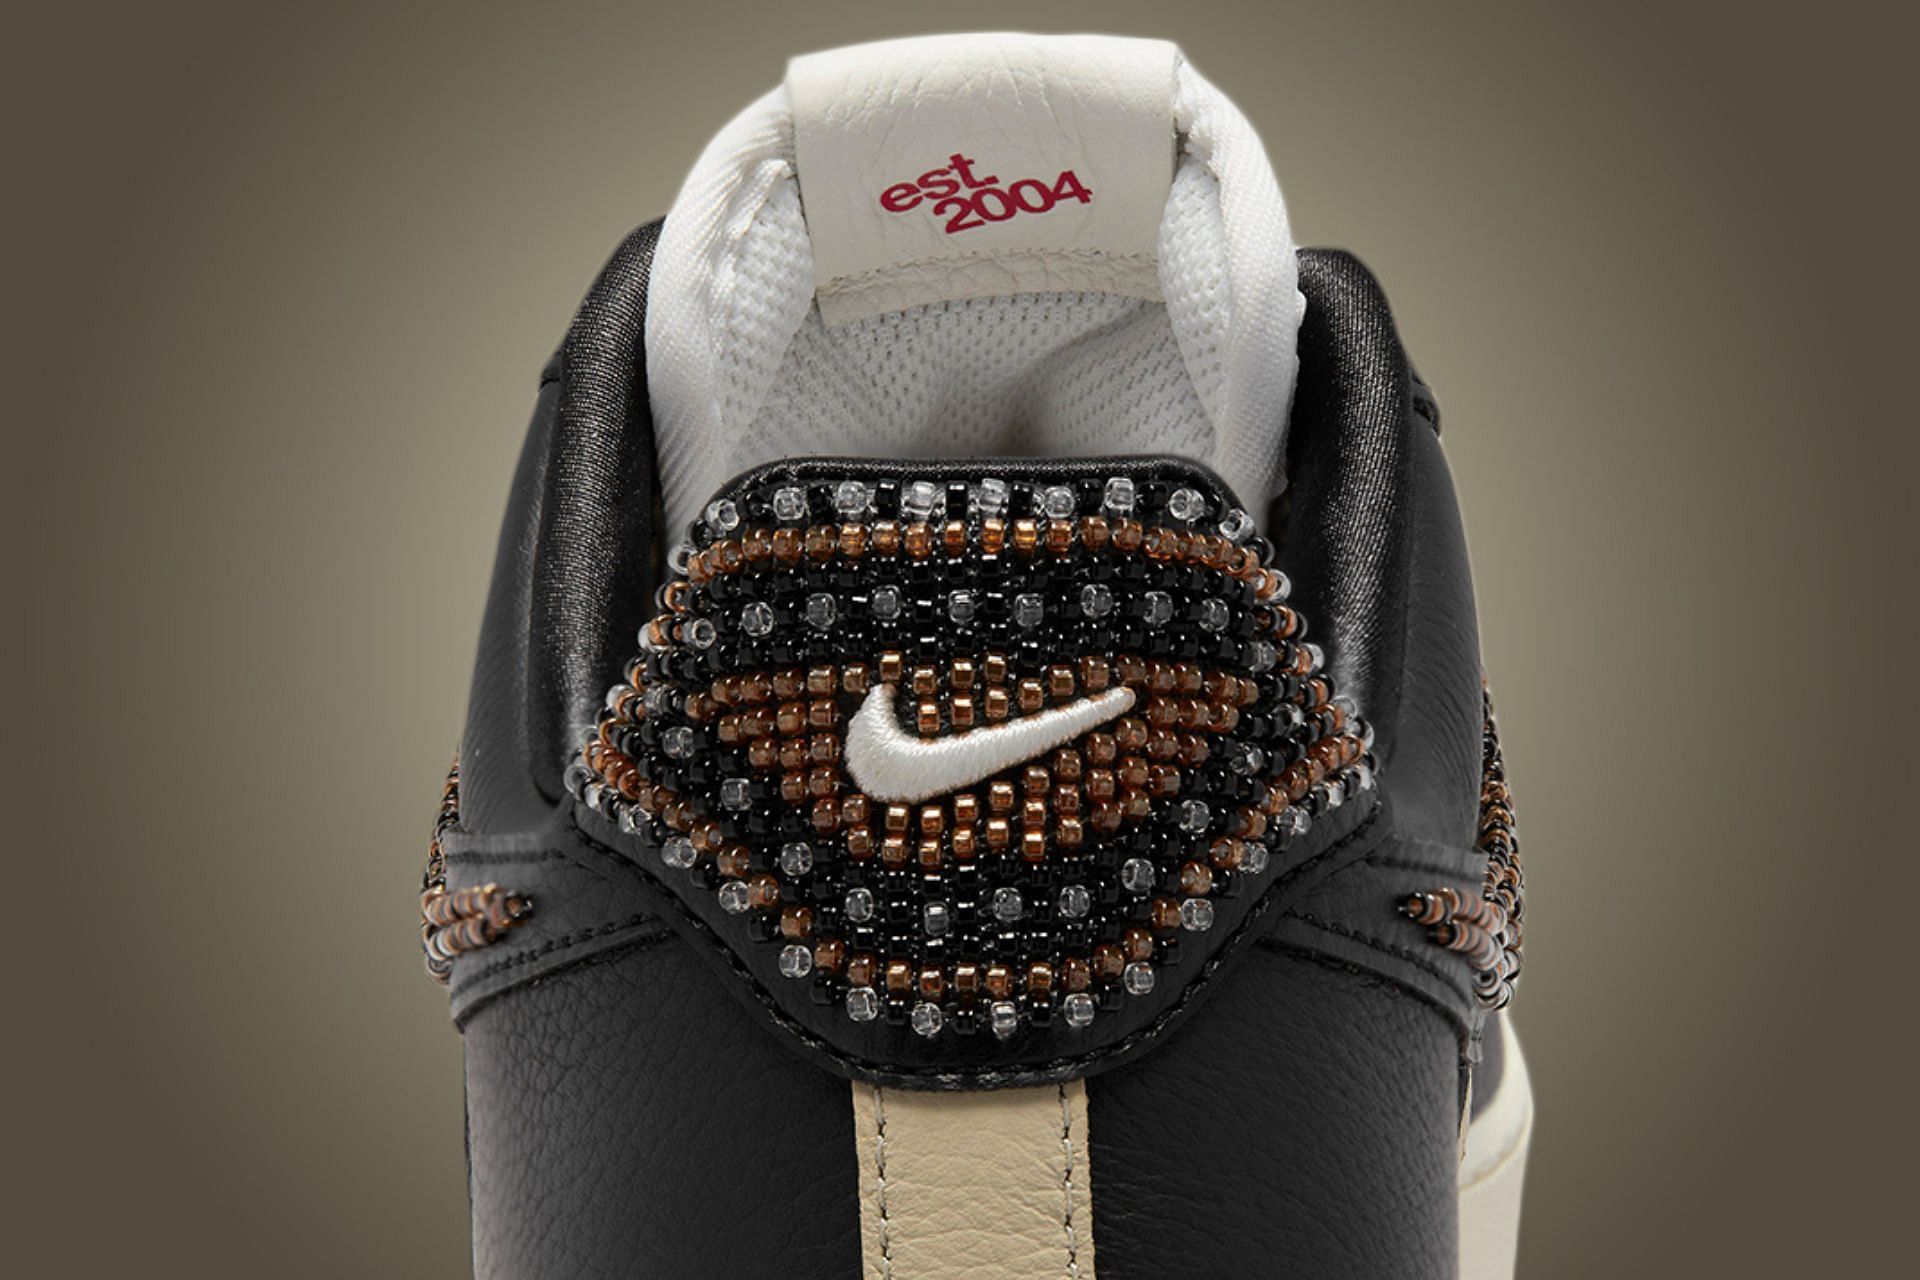 Take a look at the intricately crafted heel counters of the new Nike Air Force 1 Low shoes (Image via Nike)